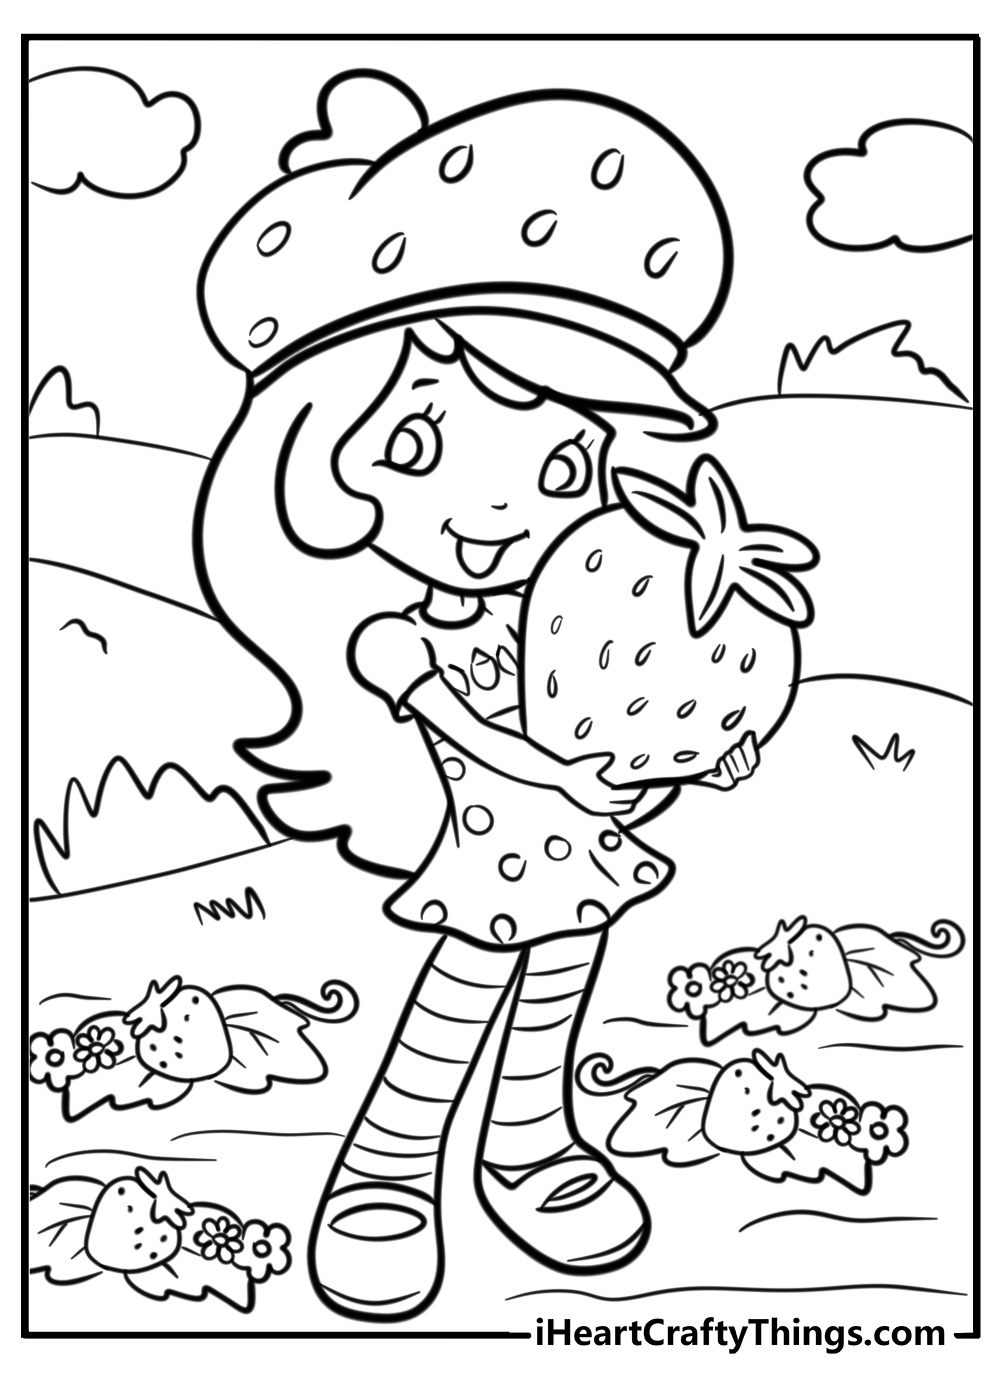 Strawberry shortcake coloring page holding giant strawberry